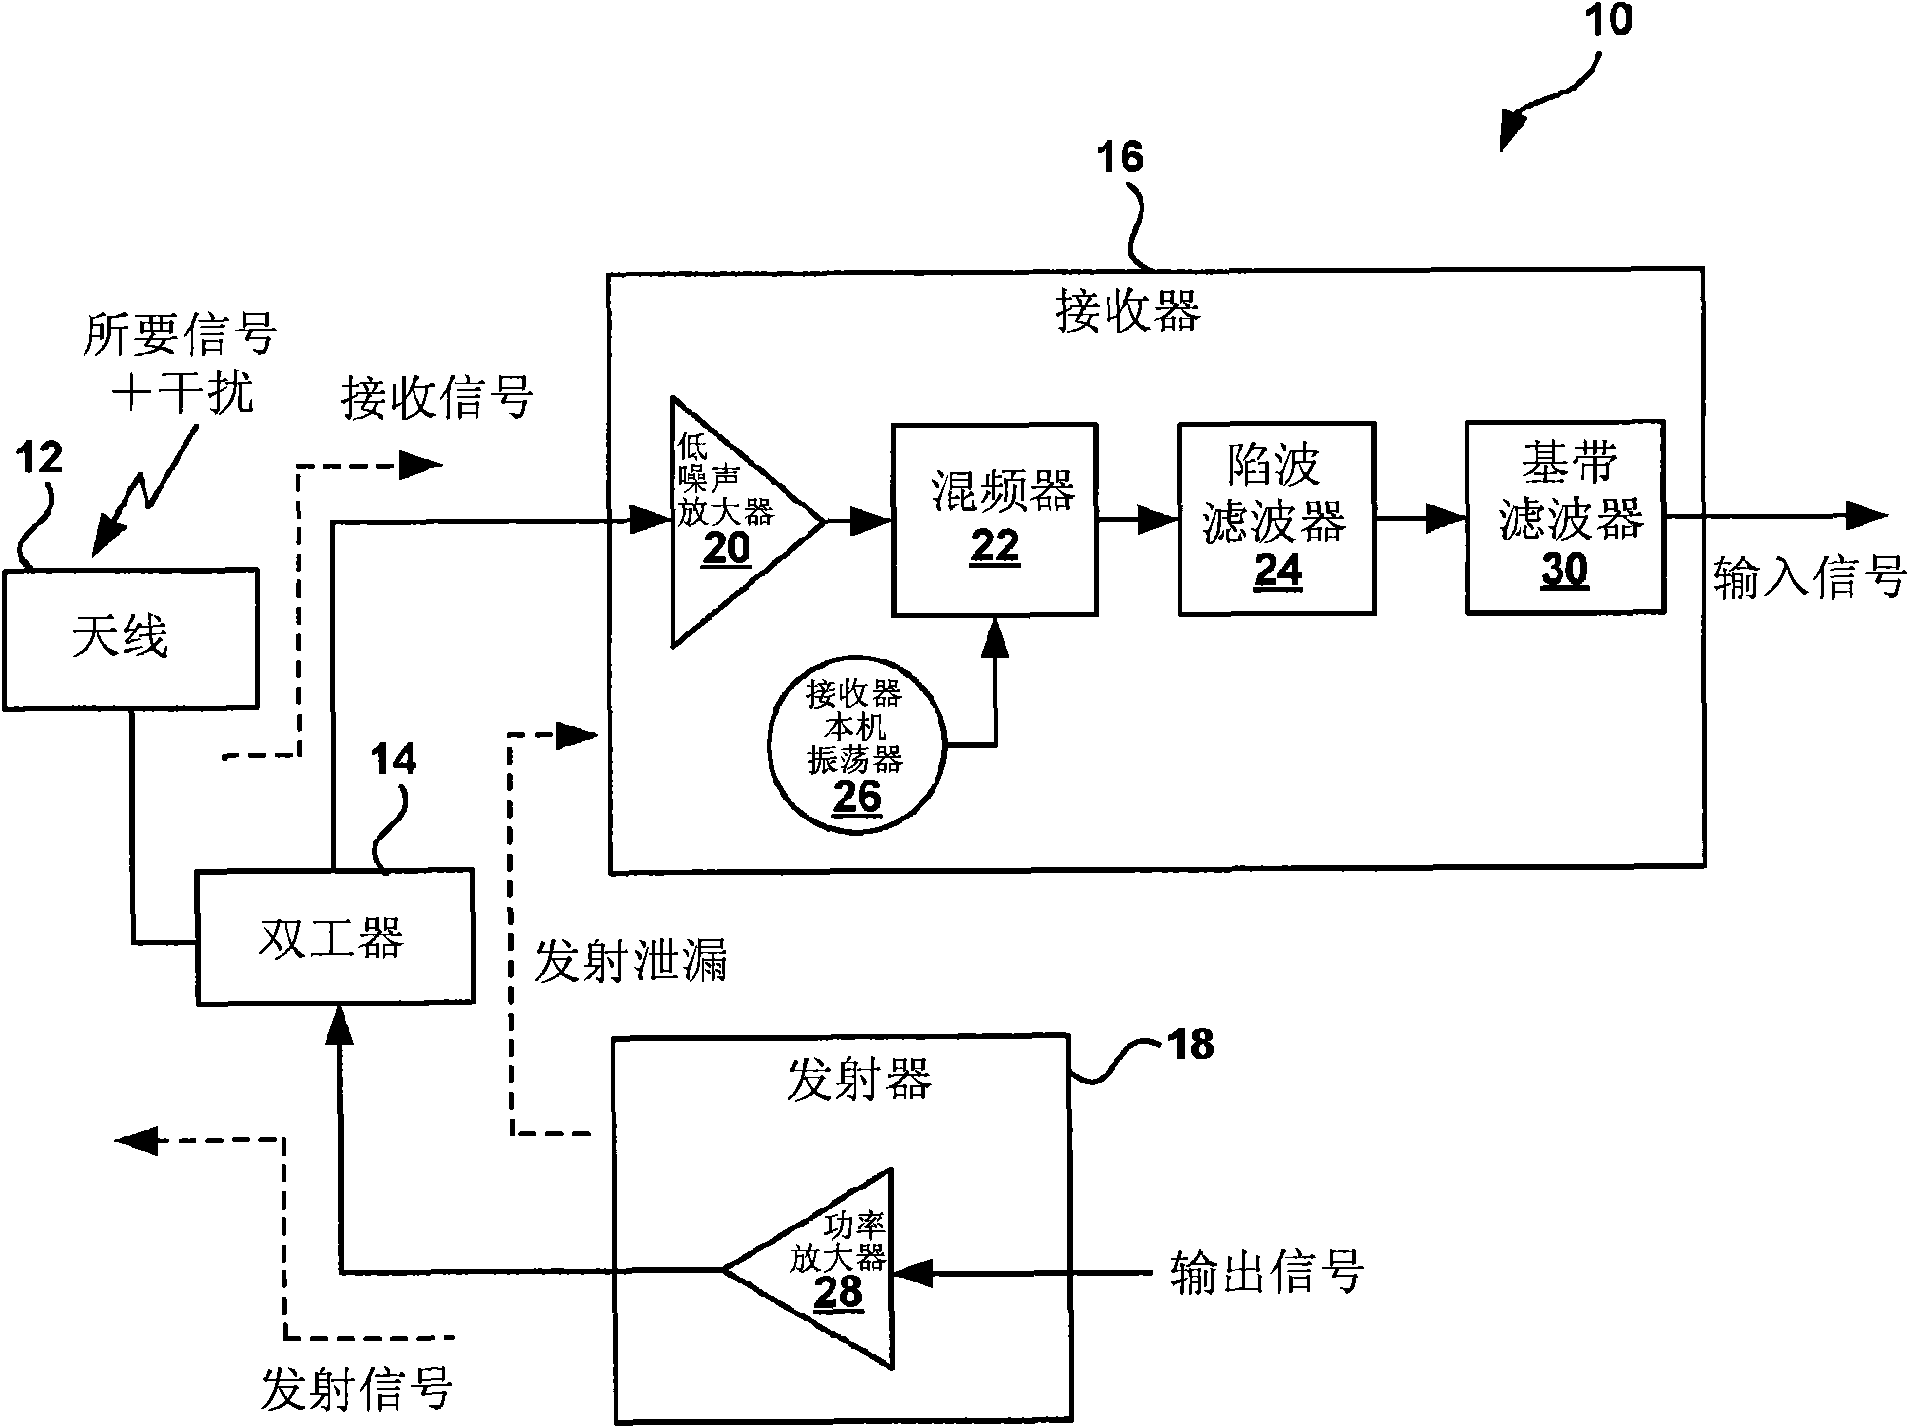 Wireless receiver with notch filter to reduce effects of transmit signal leakage